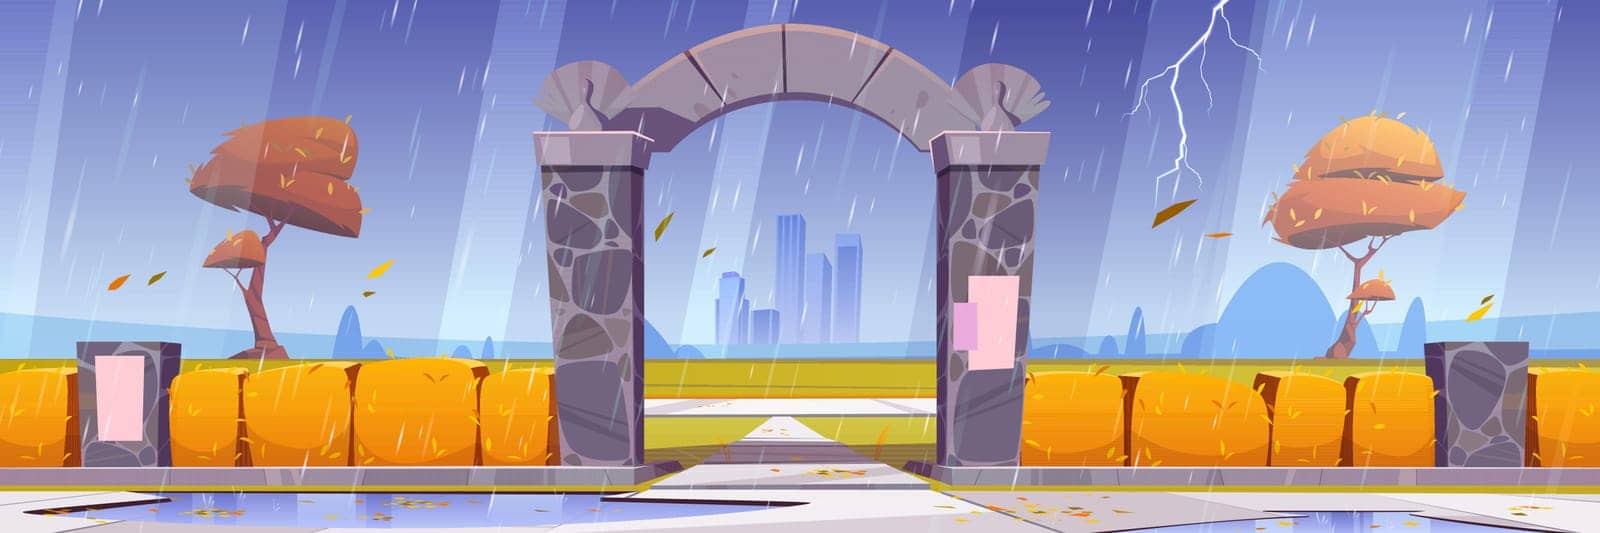 Stone gates, entrance to autumn city garden or park at rainy weather. Urban skyline with hedge fence, yellow trees and bushes on cityscape background with skyscrapers, Cartoon vector illustration